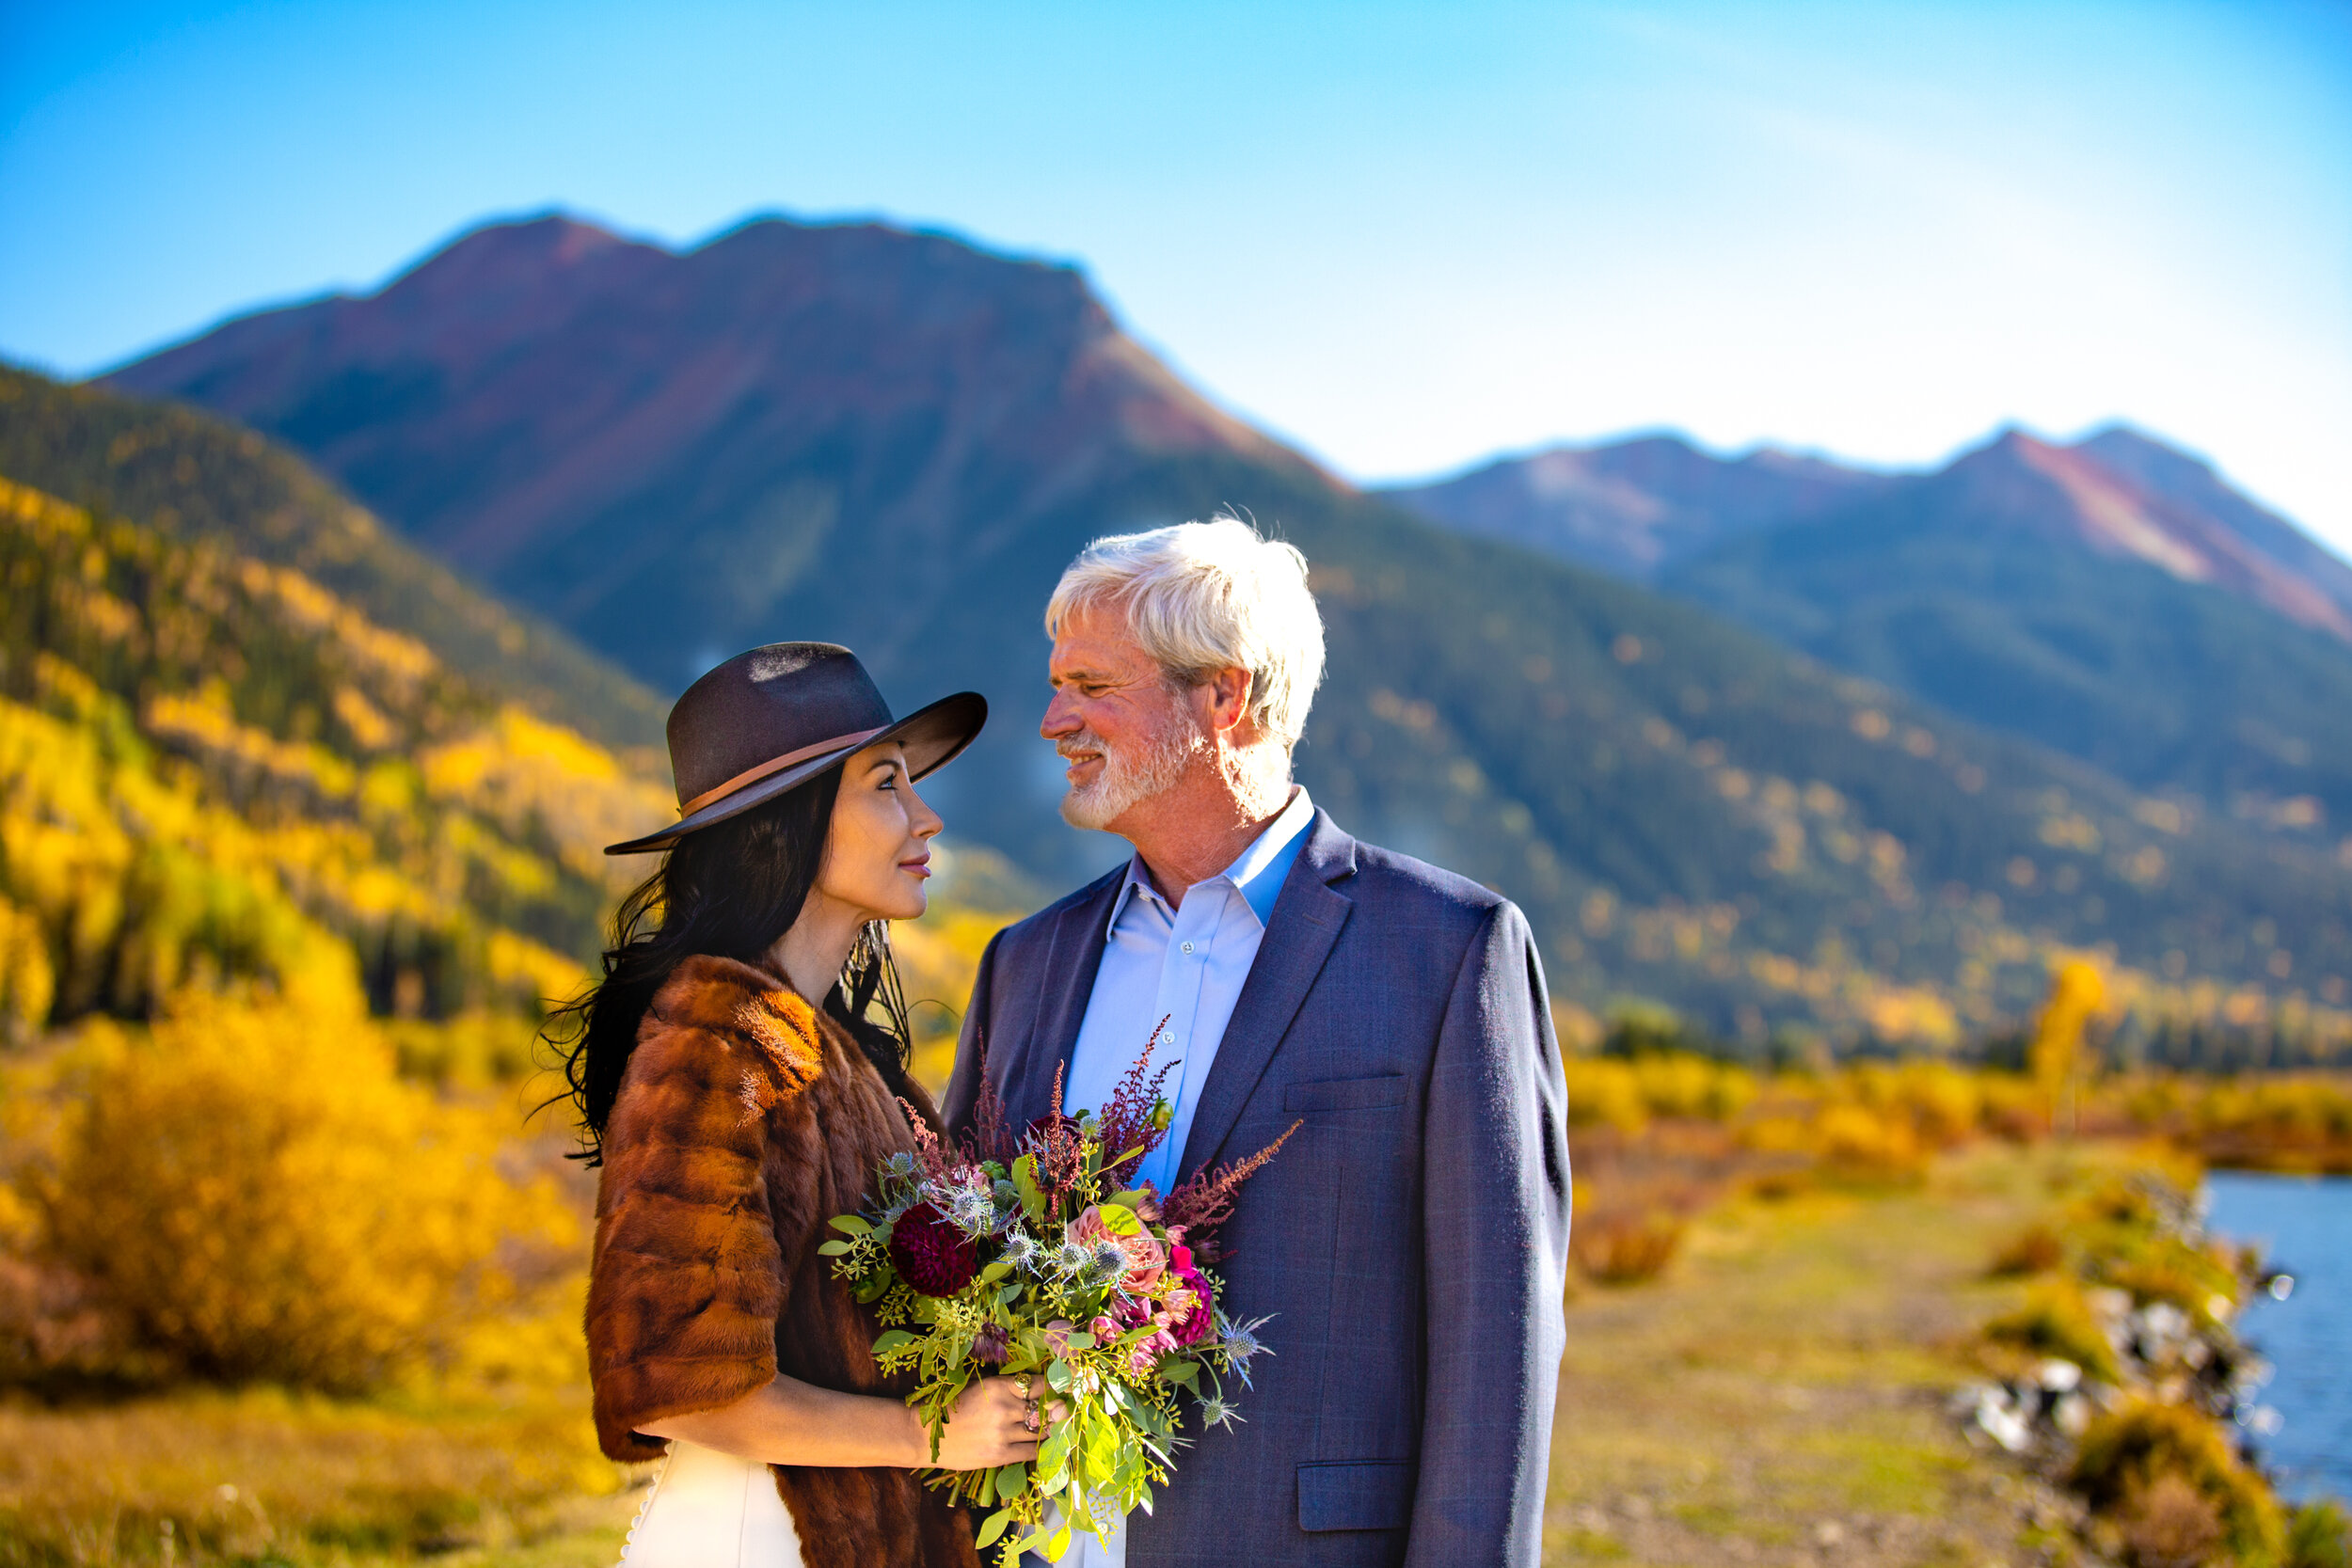  Bride’s Rosary  Crystal Lake, Ouray  Fall wedding  Ouray, Colorado  Red Mountain Pass Elopement  ©Alexi Hubbell Photography 2020 